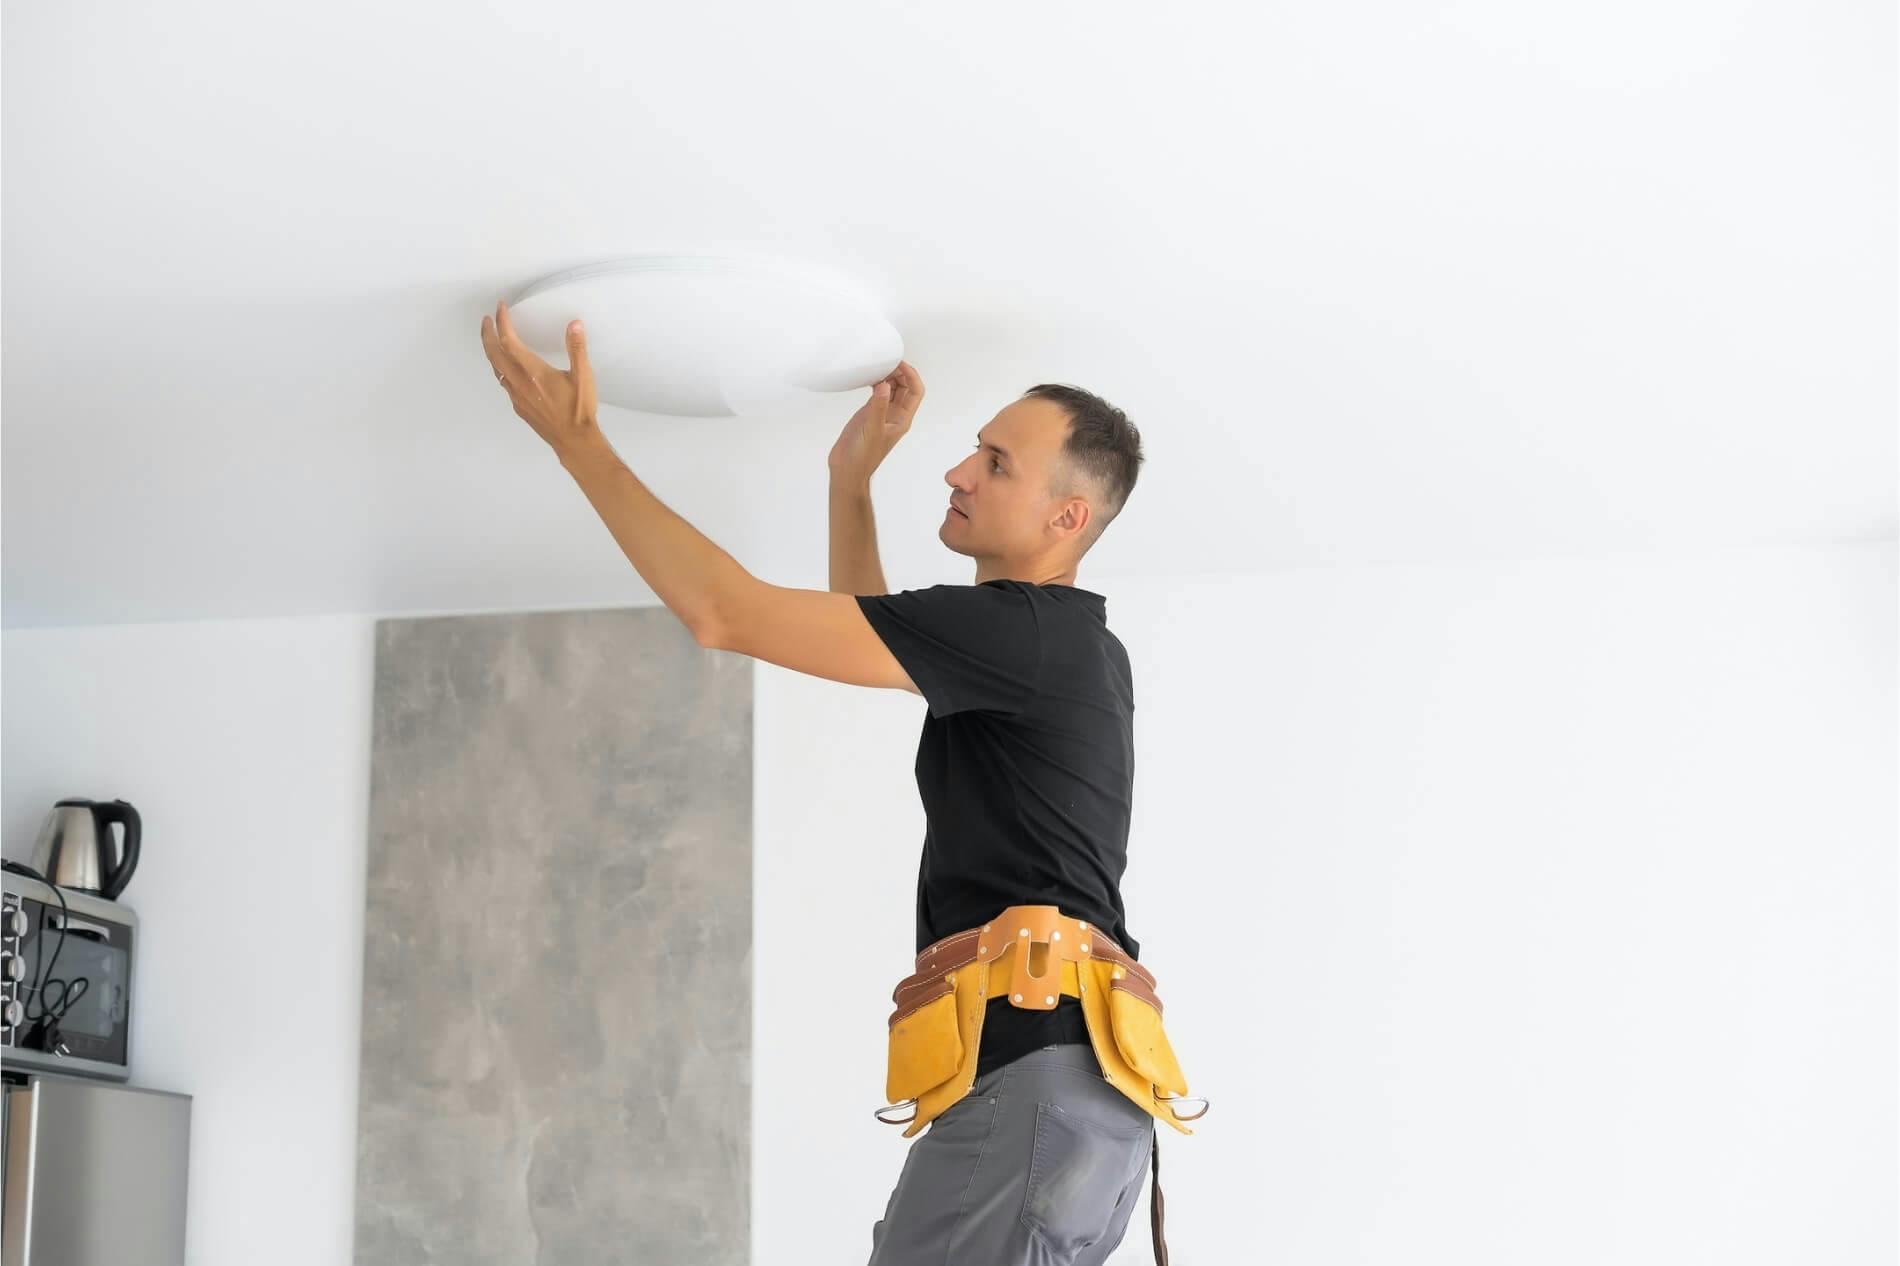 Electrician installs overhead lighting cover in kitchen